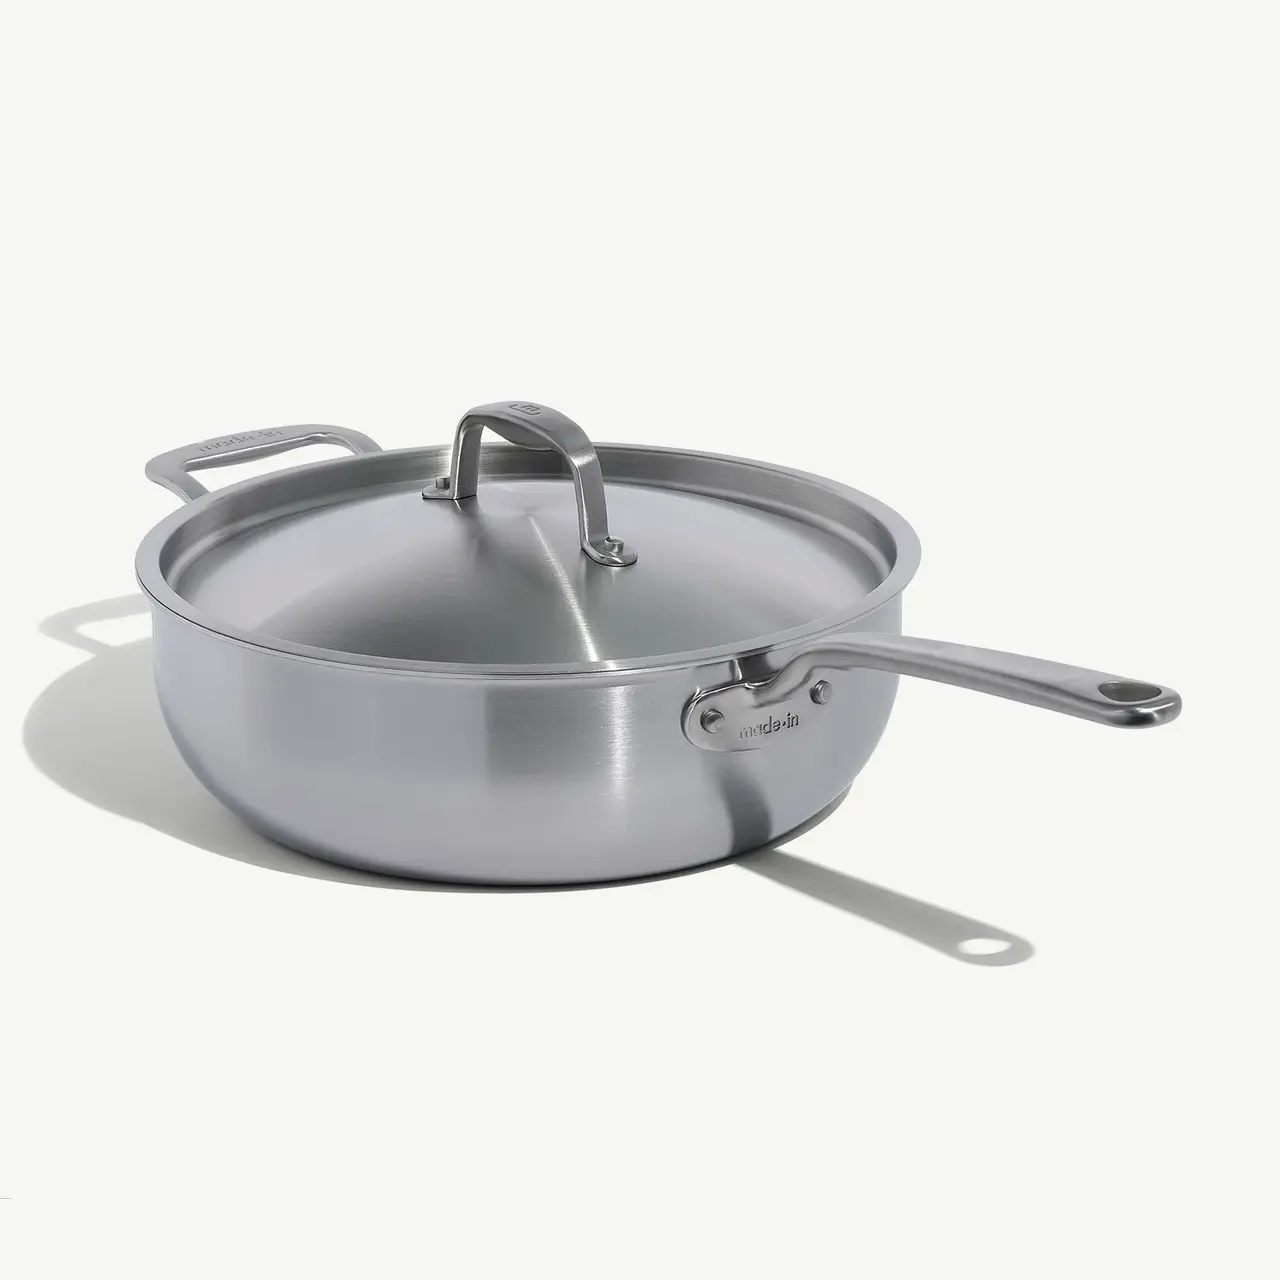 A stainless steel sauté pan with a lid sits on a neutral background, reflecting a light source.